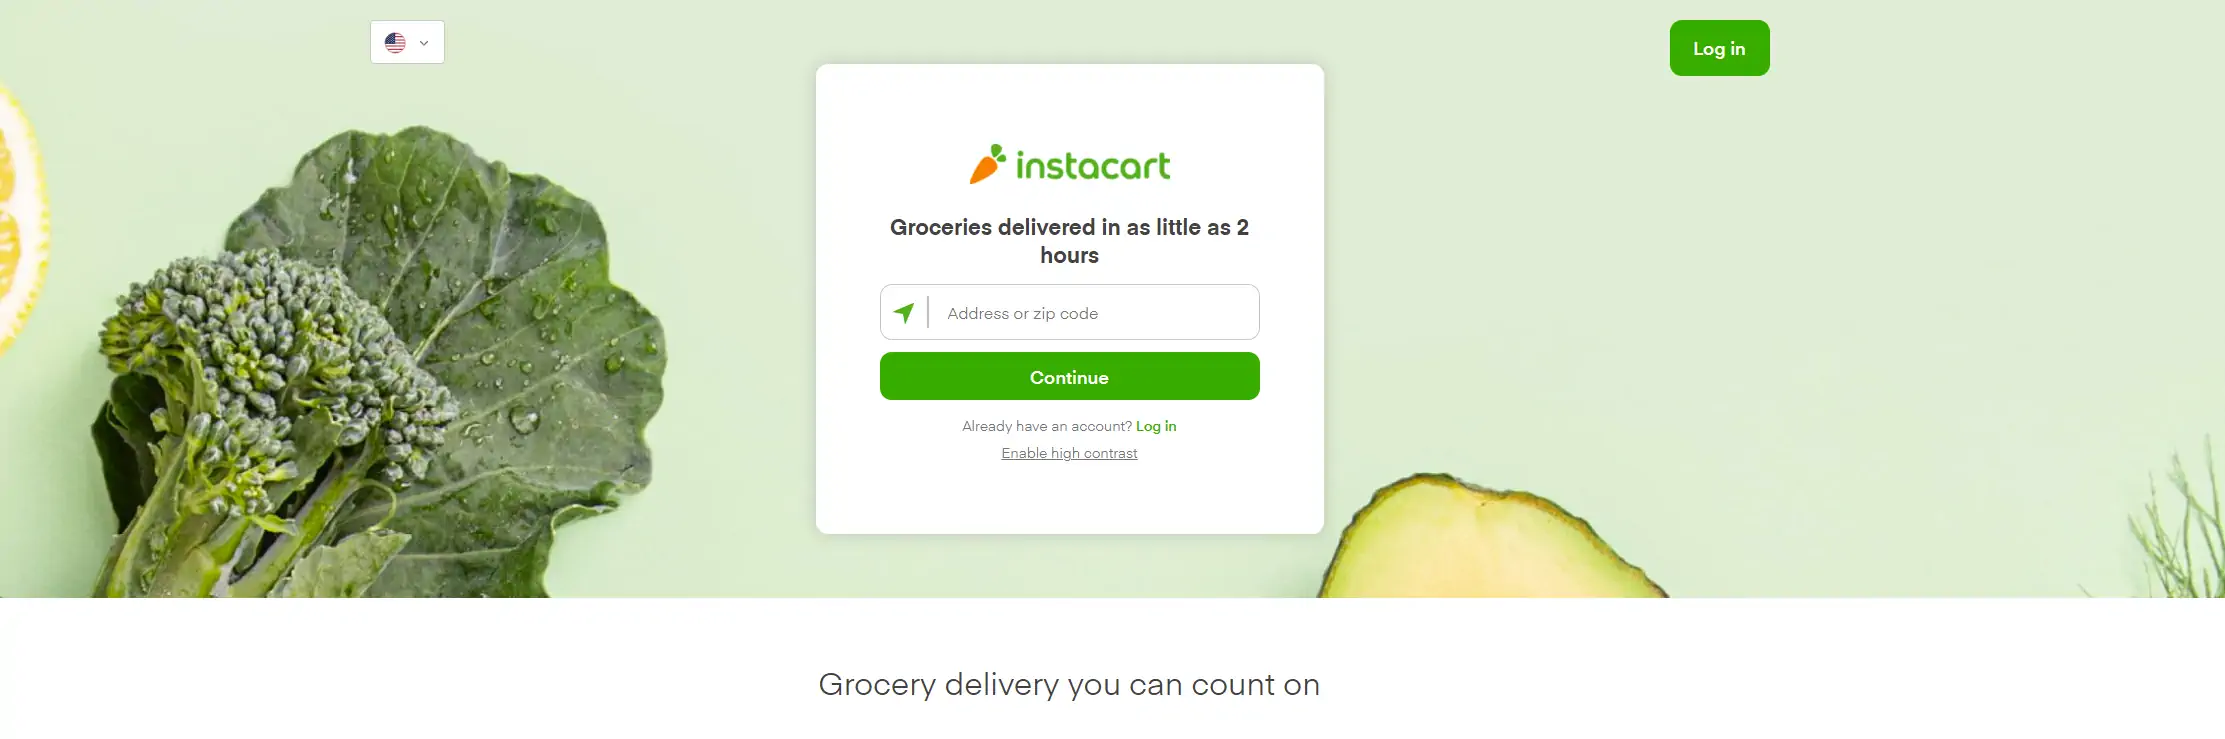 Instacart Home Page